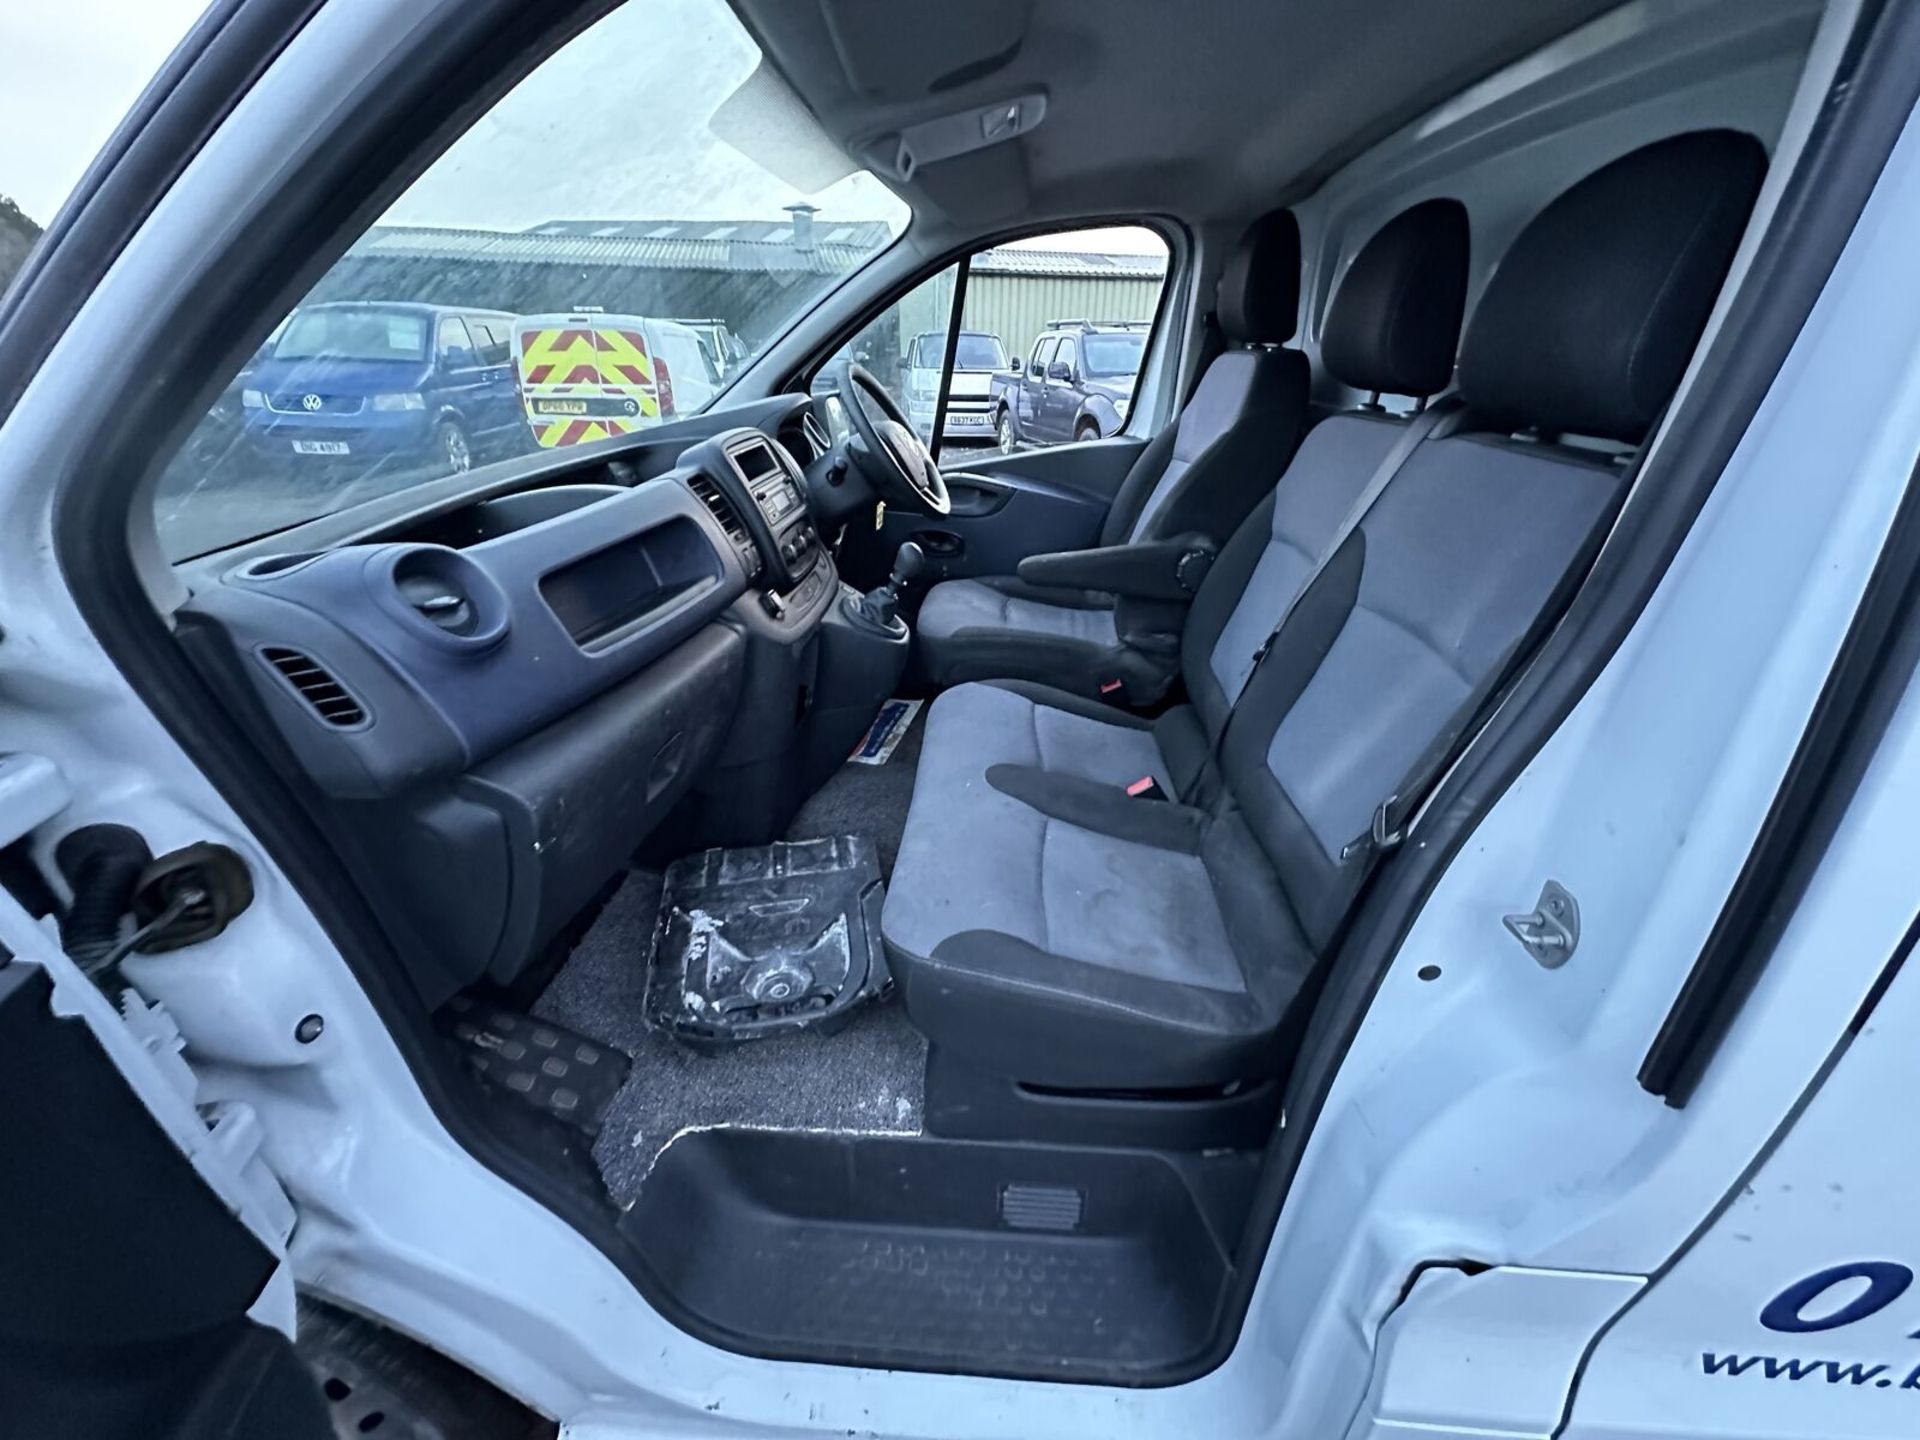 AFFORDABLE REPAIR: VAUXHALL VIVARO WITH POTENTIAL - Image 15 of 21